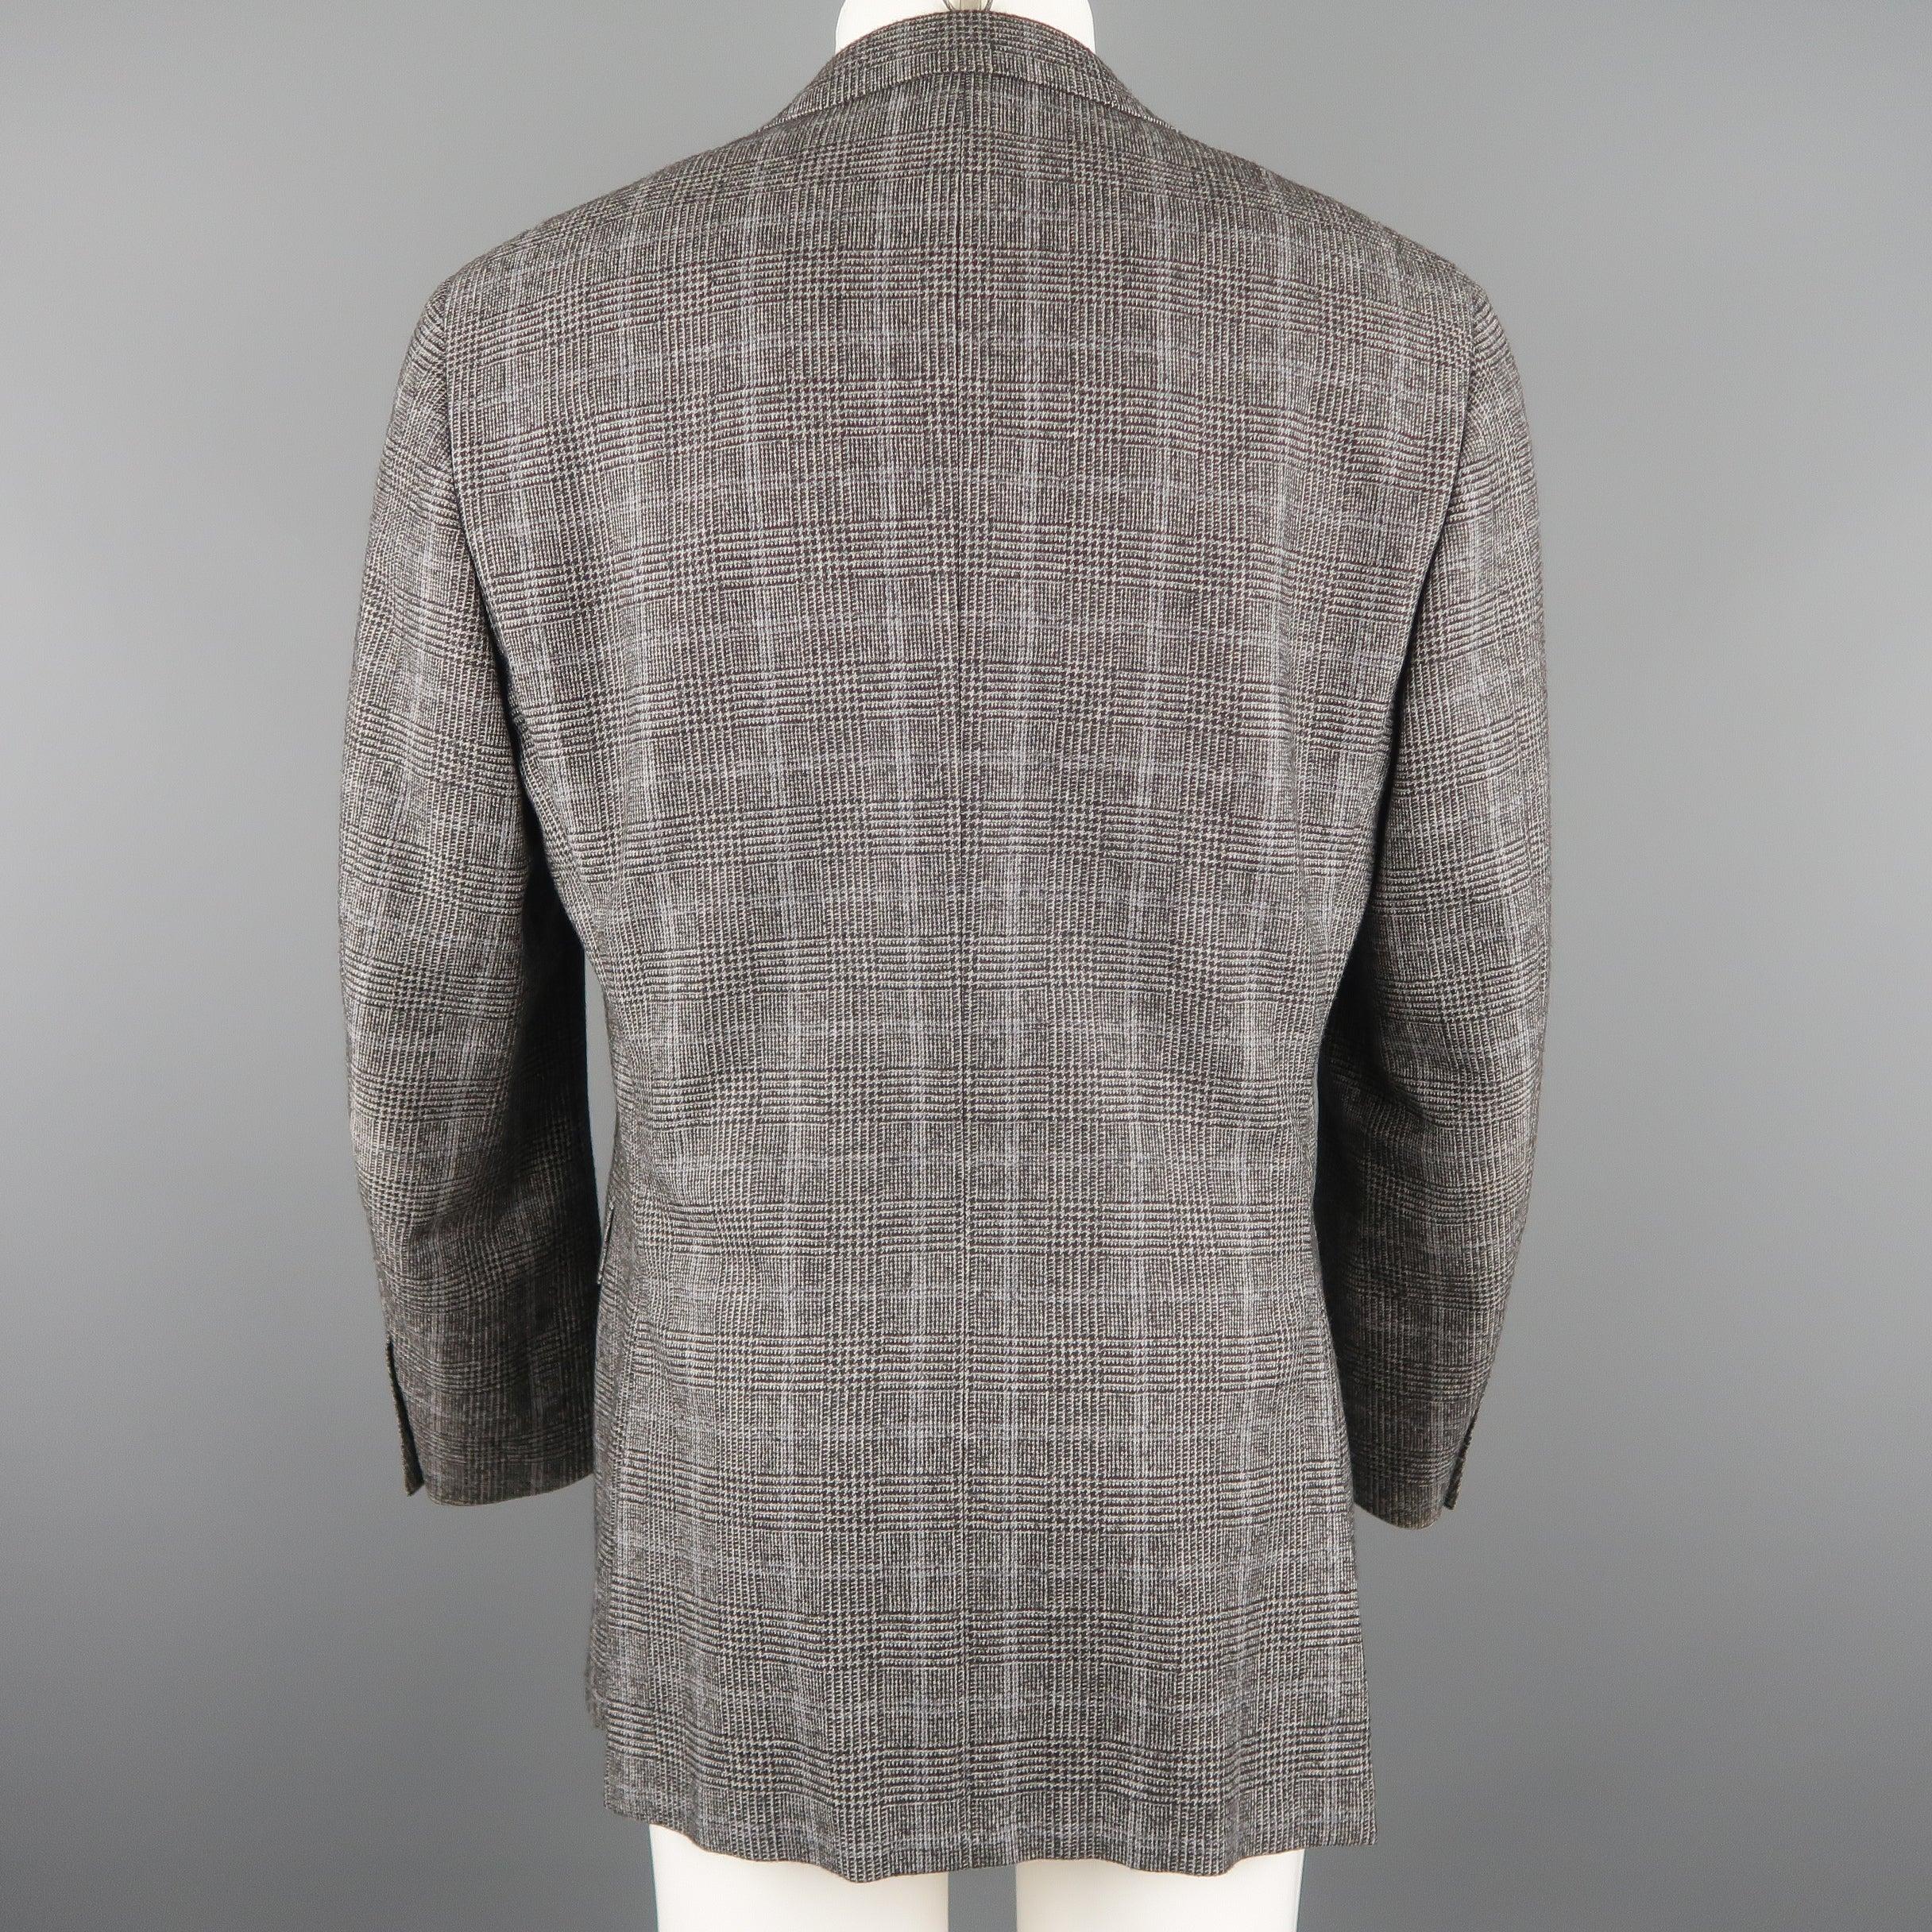 CANALI 
blazer comes in black and grey tones in a glenplaid wool / cotton material, featuring a notch lapel, slit and flap pockets, 2 buttons closure, single breasted. Made in Italy. Excellent Pre-Owned Condition. 

Marked:   50R IT 

Measurements: